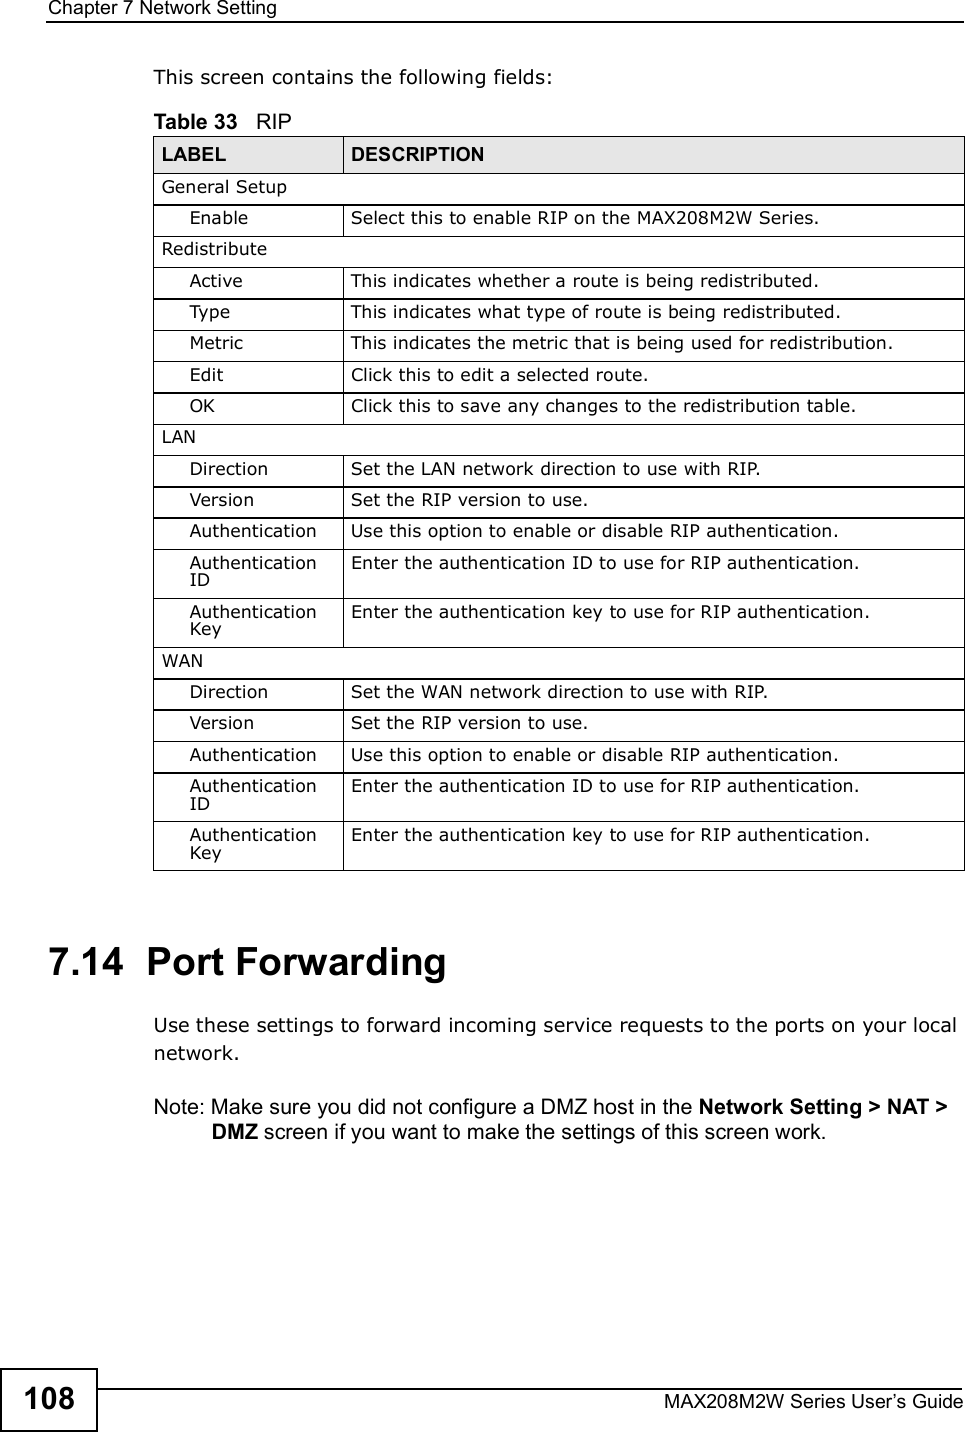 Chapter 7Network SettingMAX208M2W Series User s Guide108This screen contains the following fields:7.14  Port ForwardingUse these settings to forward incoming service requests to the ports on your local network.Note: Make sure you did not configure a DMZ host in the Network Setting &gt; NAT &gt; DMZ screen if you want to make the settings of this screen work.Table 33   RIPLABEL DESCRIPTIONGeneral SetupEnableSelect this to enable RIP on the MAX208M2W Series.RedistributeActiveThis indicates whether a route is being redistributed.TypeThis indicates what type of route is being redistributed.MetricThis indicates the metric that is being used for redistribution.EditClick this to edit a selected route.OKClick this to save any changes to the redistribution table.LANDirectionSet the LAN network direction to use with RIP.VersionSet the RIP version to use.AuthenticationUse this option to enable or disable RIP authentication.Authentication IDEnter the authentication ID to use for RIP authentication.Authentication KeyEnter the authentication key to use for RIP authentication.WANDirectionSet the WAN network direction to use with RIP.VersionSet the RIP version to use.AuthenticationUse this option to enable or disable RIP authentication.Authentication IDEnter the authentication ID to use for RIP authentication.Authentication KeyEnter the authentication key to use for RIP authentication.